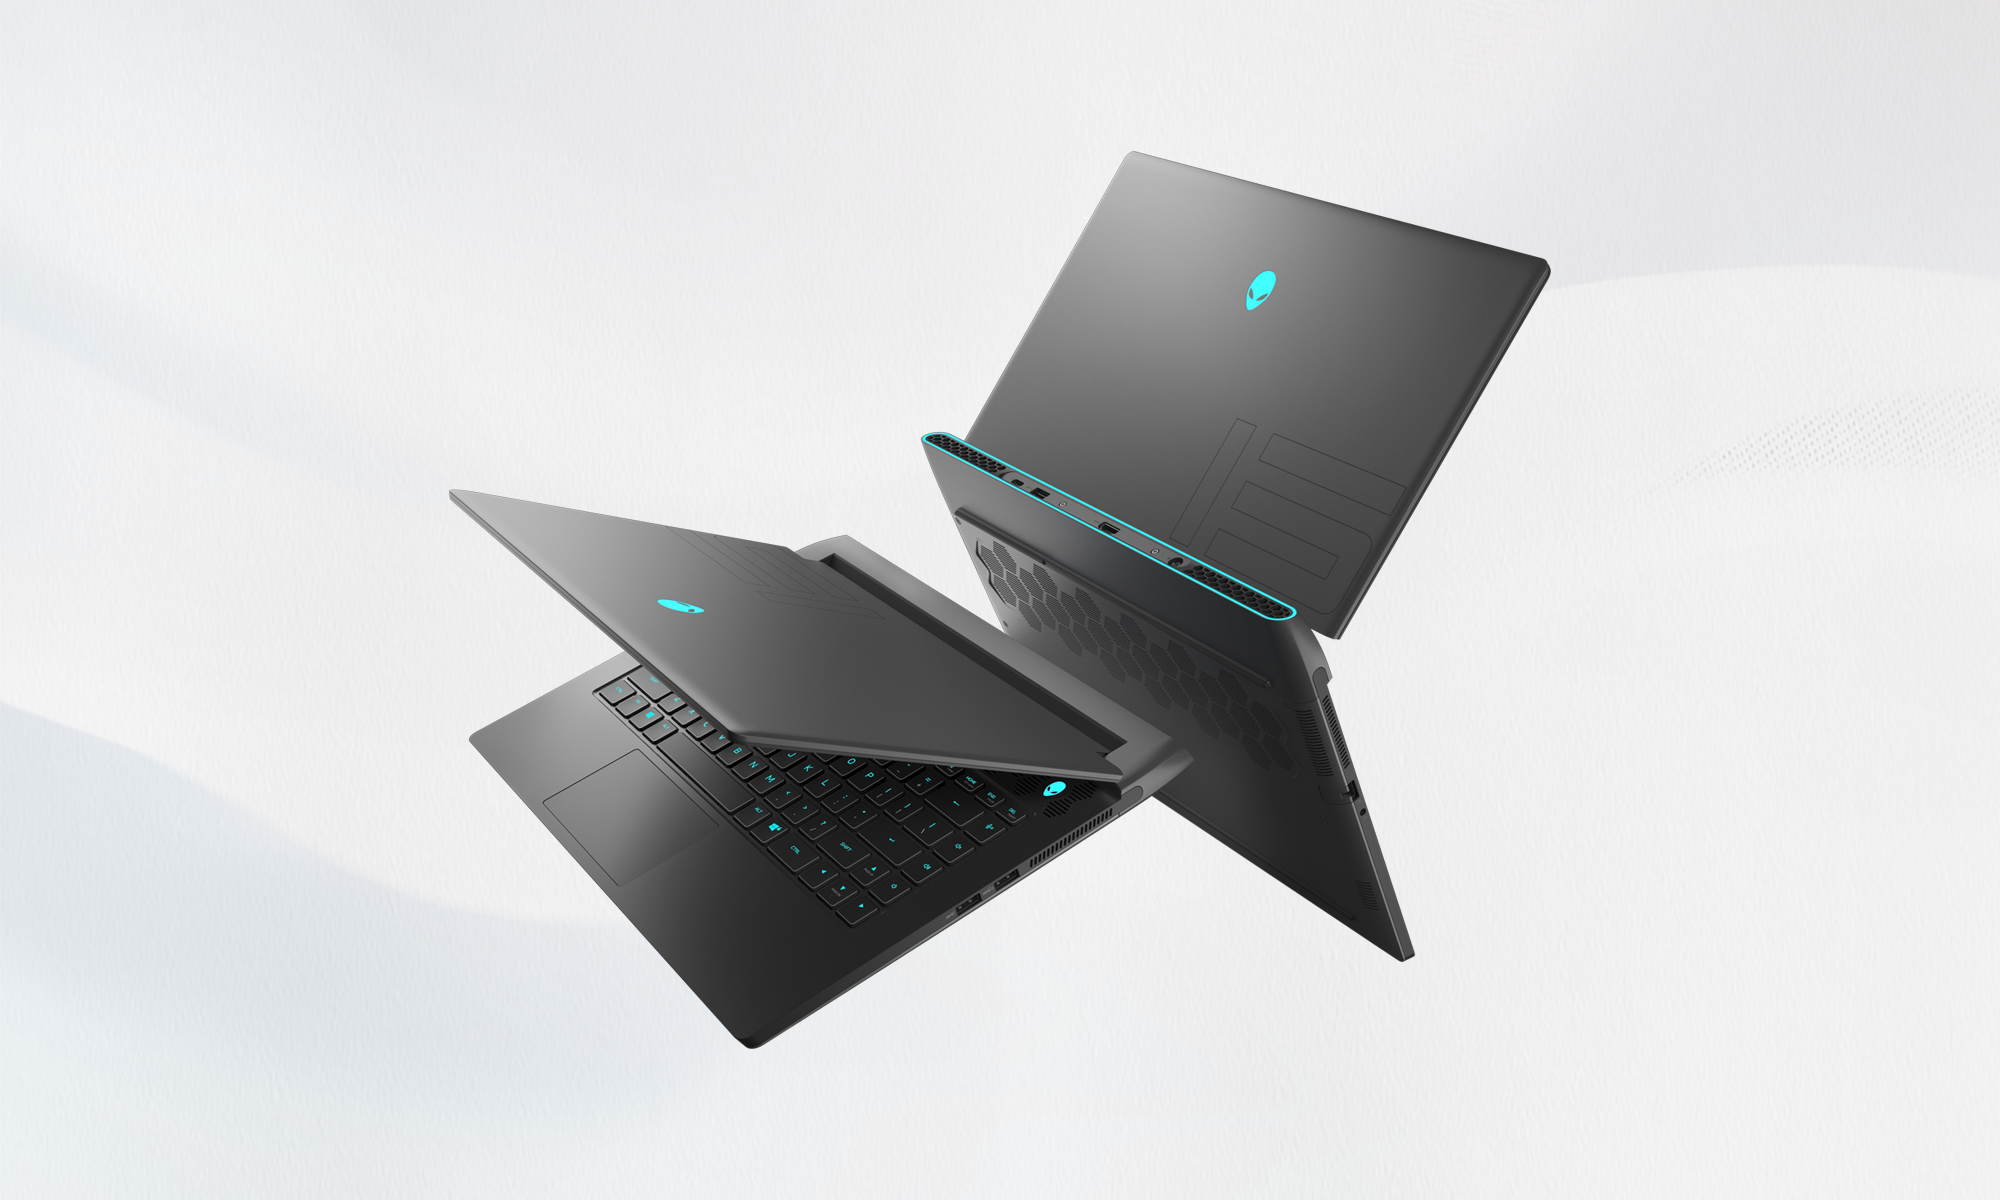 Dell Alienware m15 R5 Ryzen Edition And m15 R6 Gaming Laptops